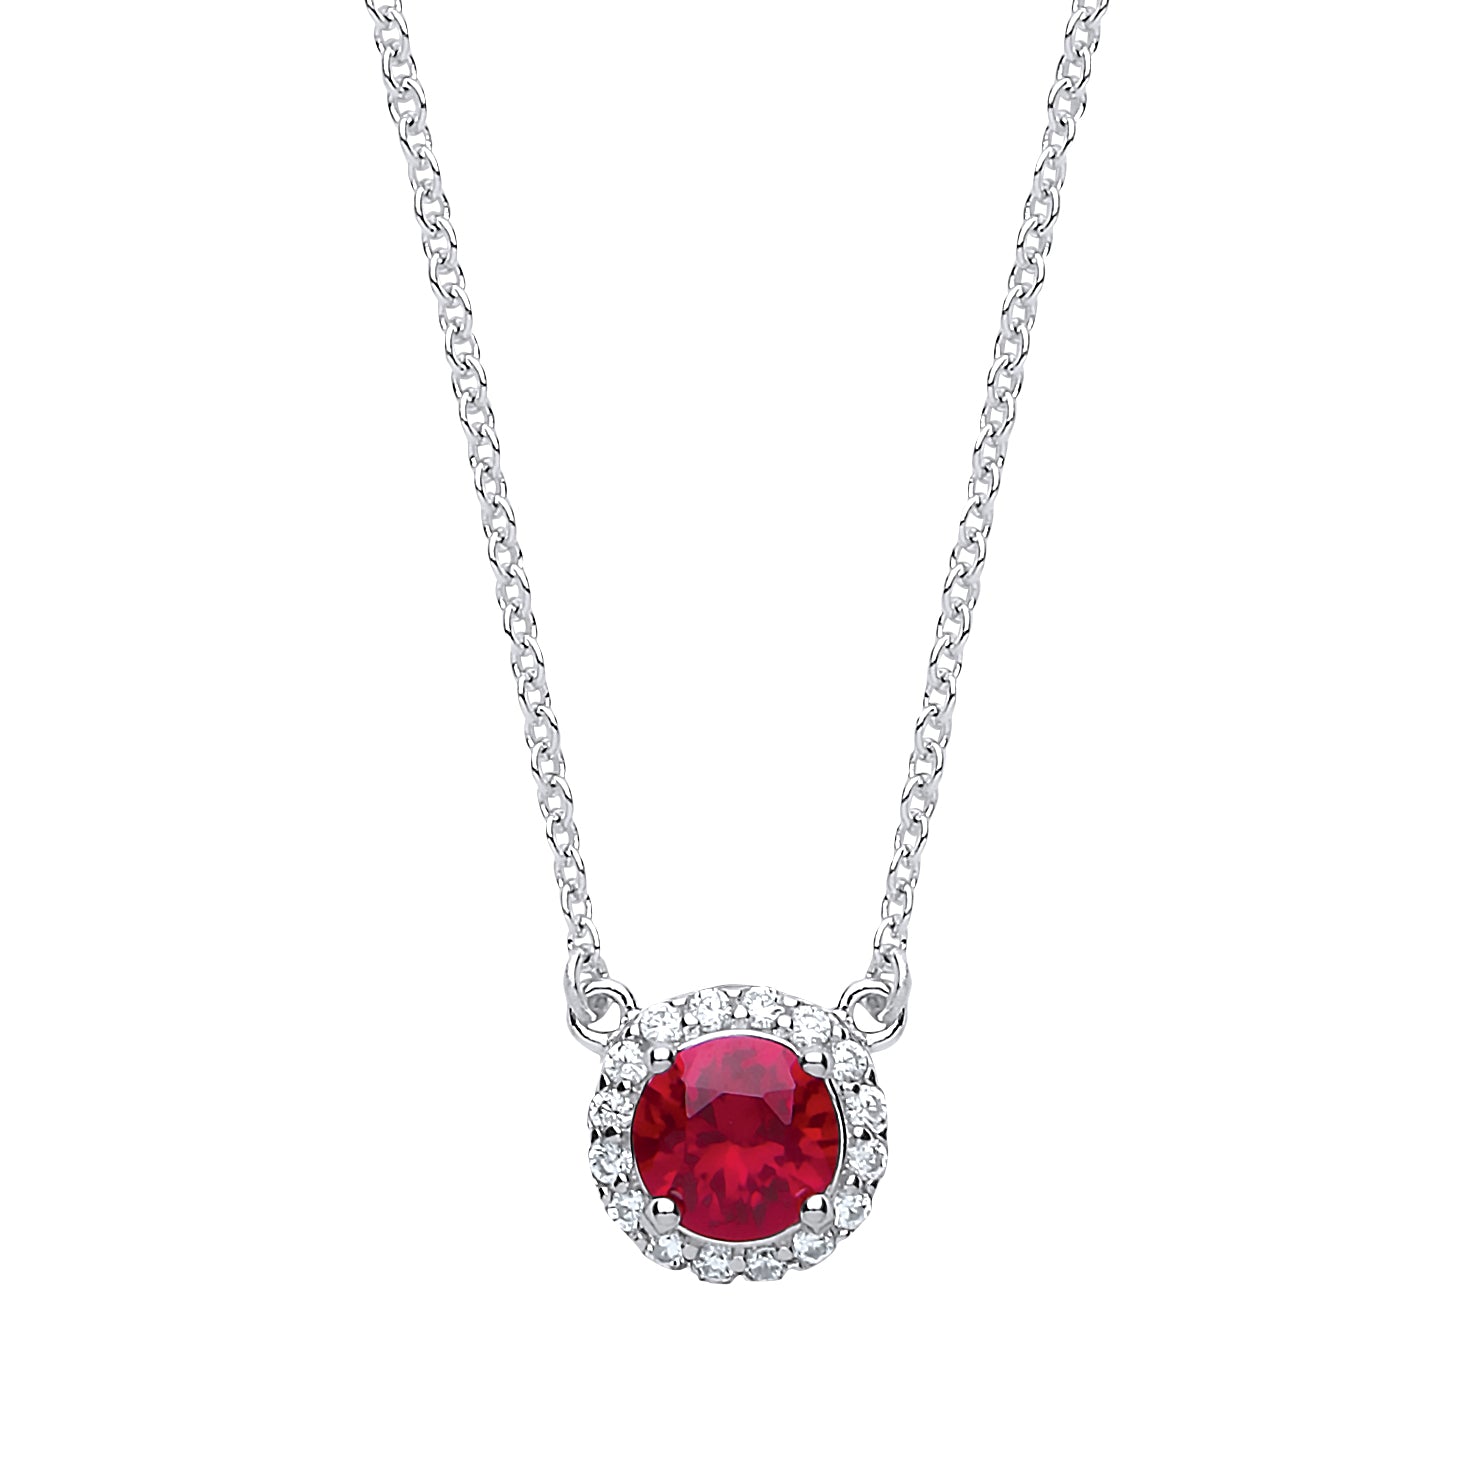 Silver  Rose red CZ Solitaire Halo Charm Necklace 15 + 2 inch - GVK158RUBY